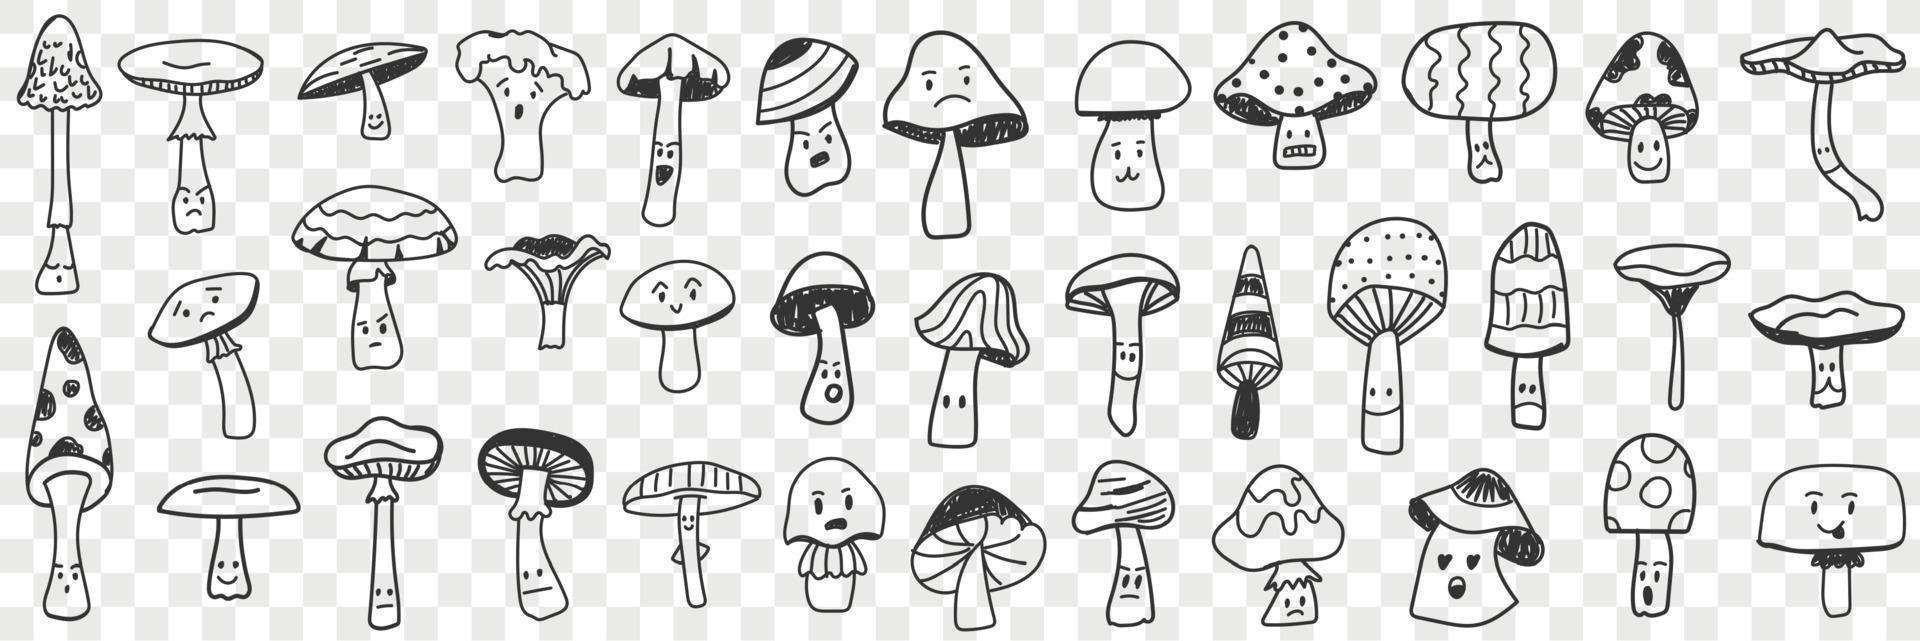 Edible and inedible mushroom doodle set. Collection of hand drawn edible and inedible mushrooms types growing in forest for picking isolated on transparent background vector